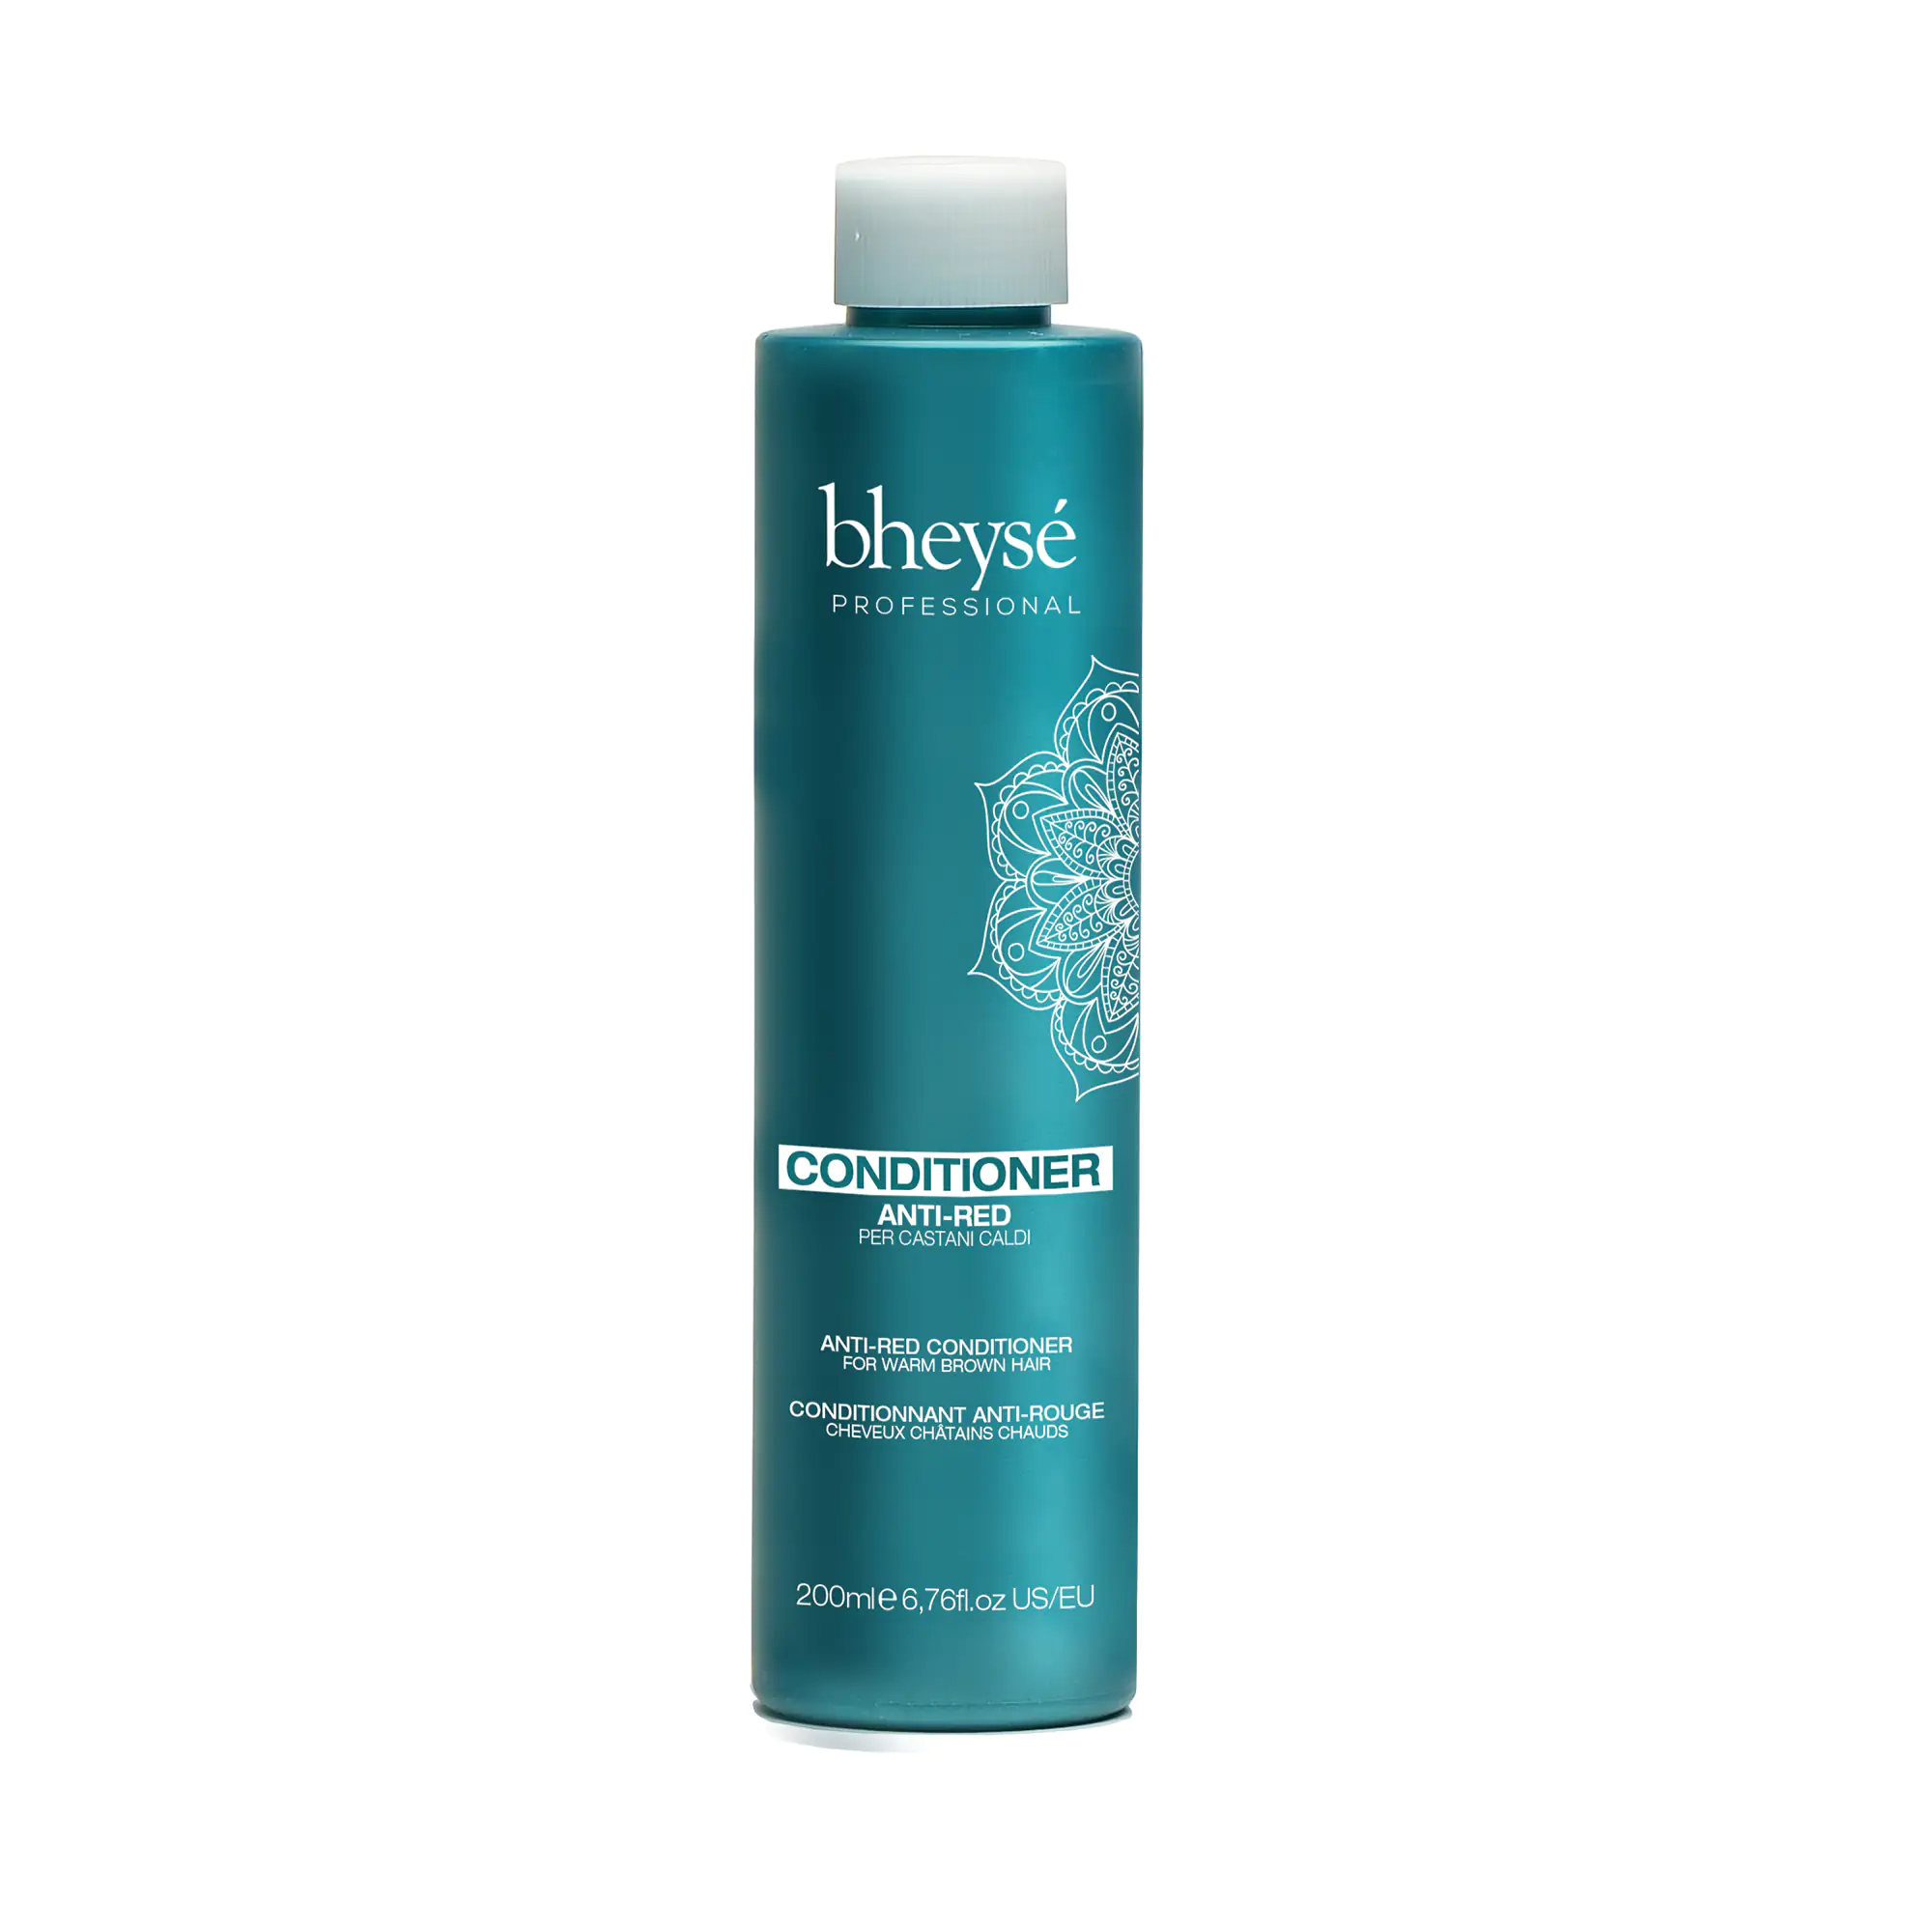 Bheyse Conditioner No-Red 200ml - Femme Fatale - Bheyse Conditioner No-Red 200ml